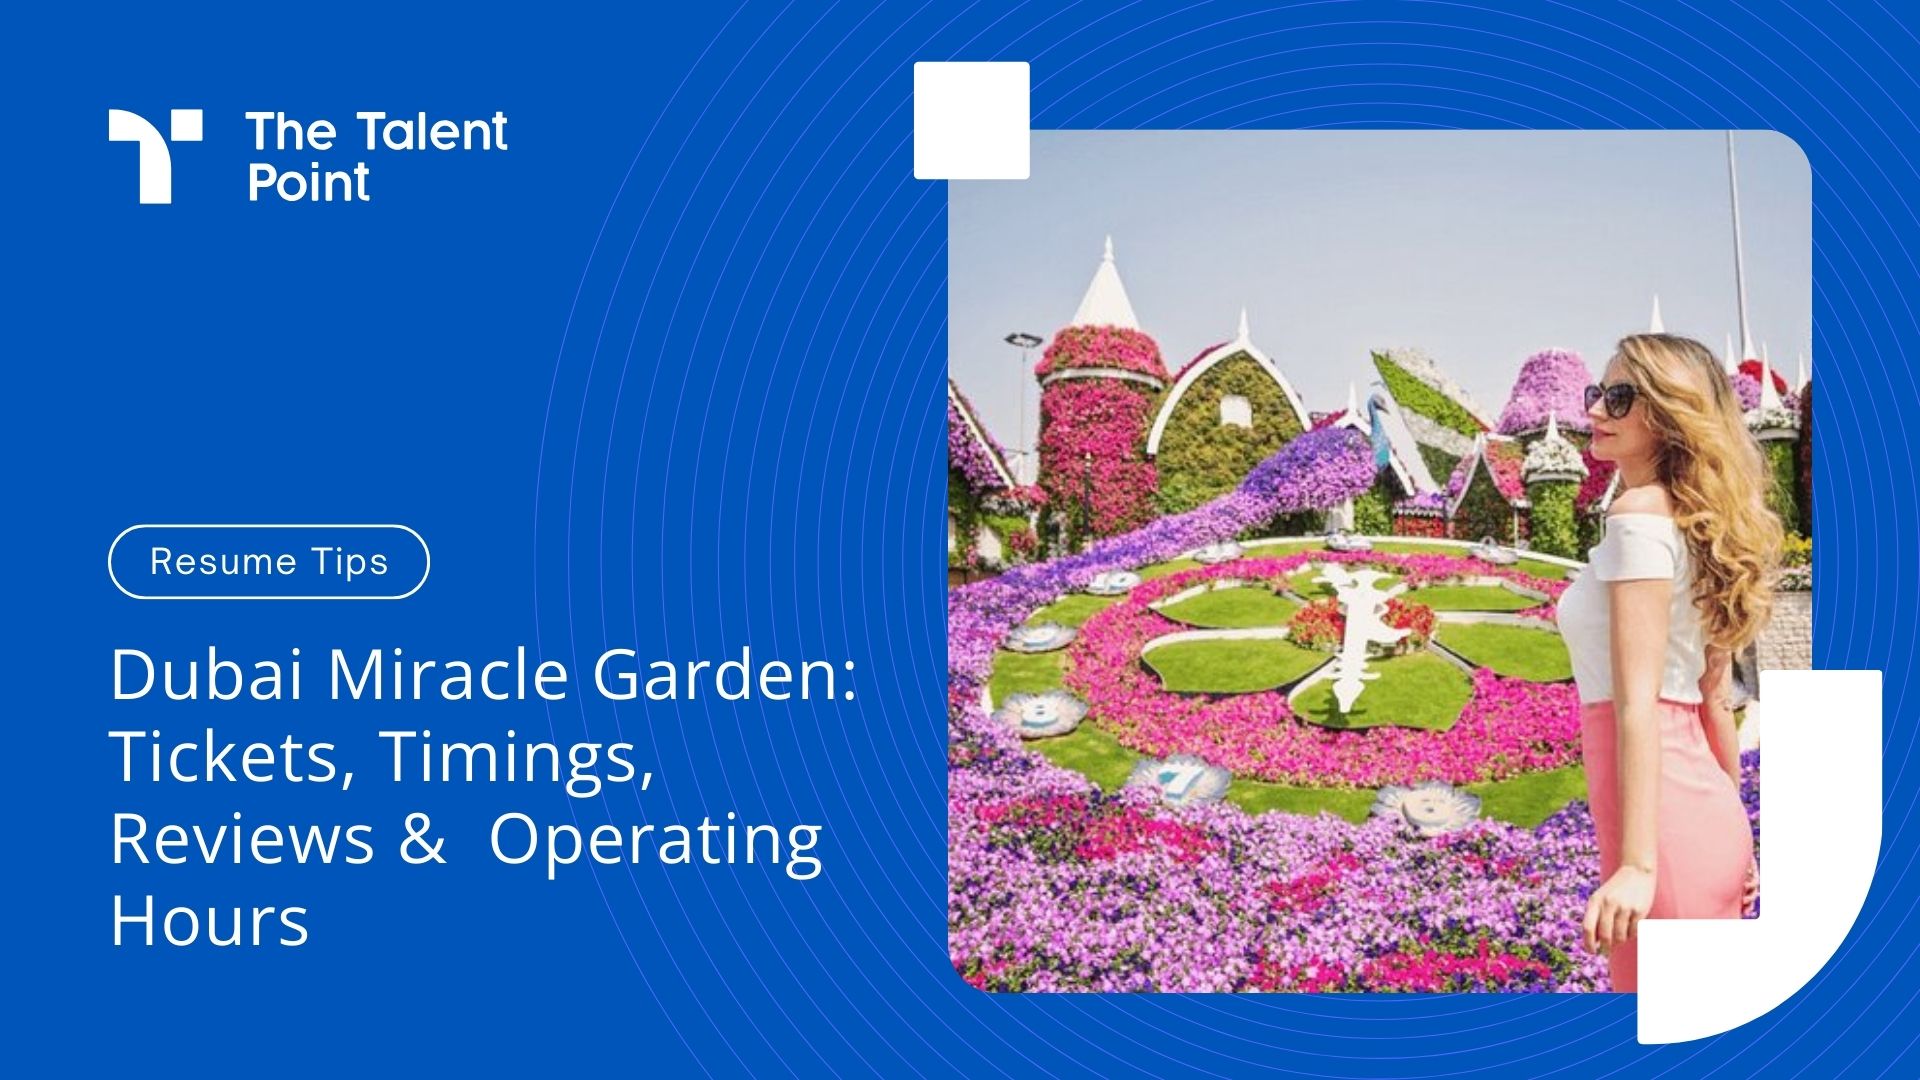 Dubai Miracle Garden: Tickets, Timings, Reviews, & Operating Hours